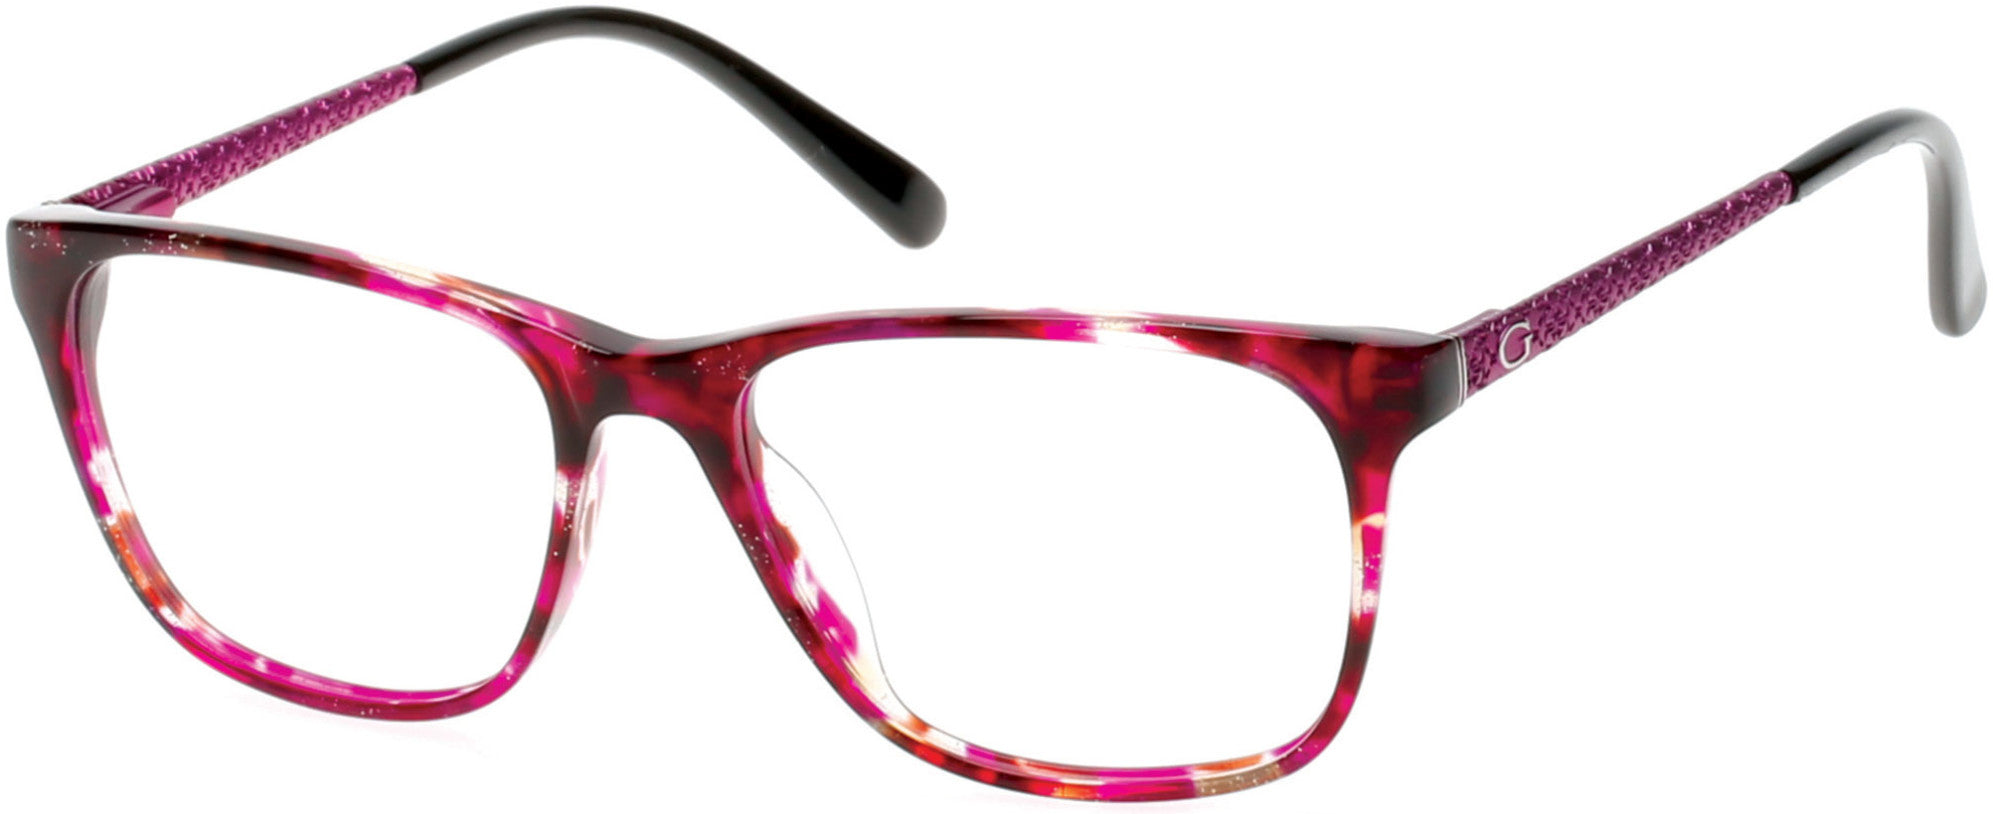 Guess GU2500 Square Eyeglasses 077-077 - Fuxia/other